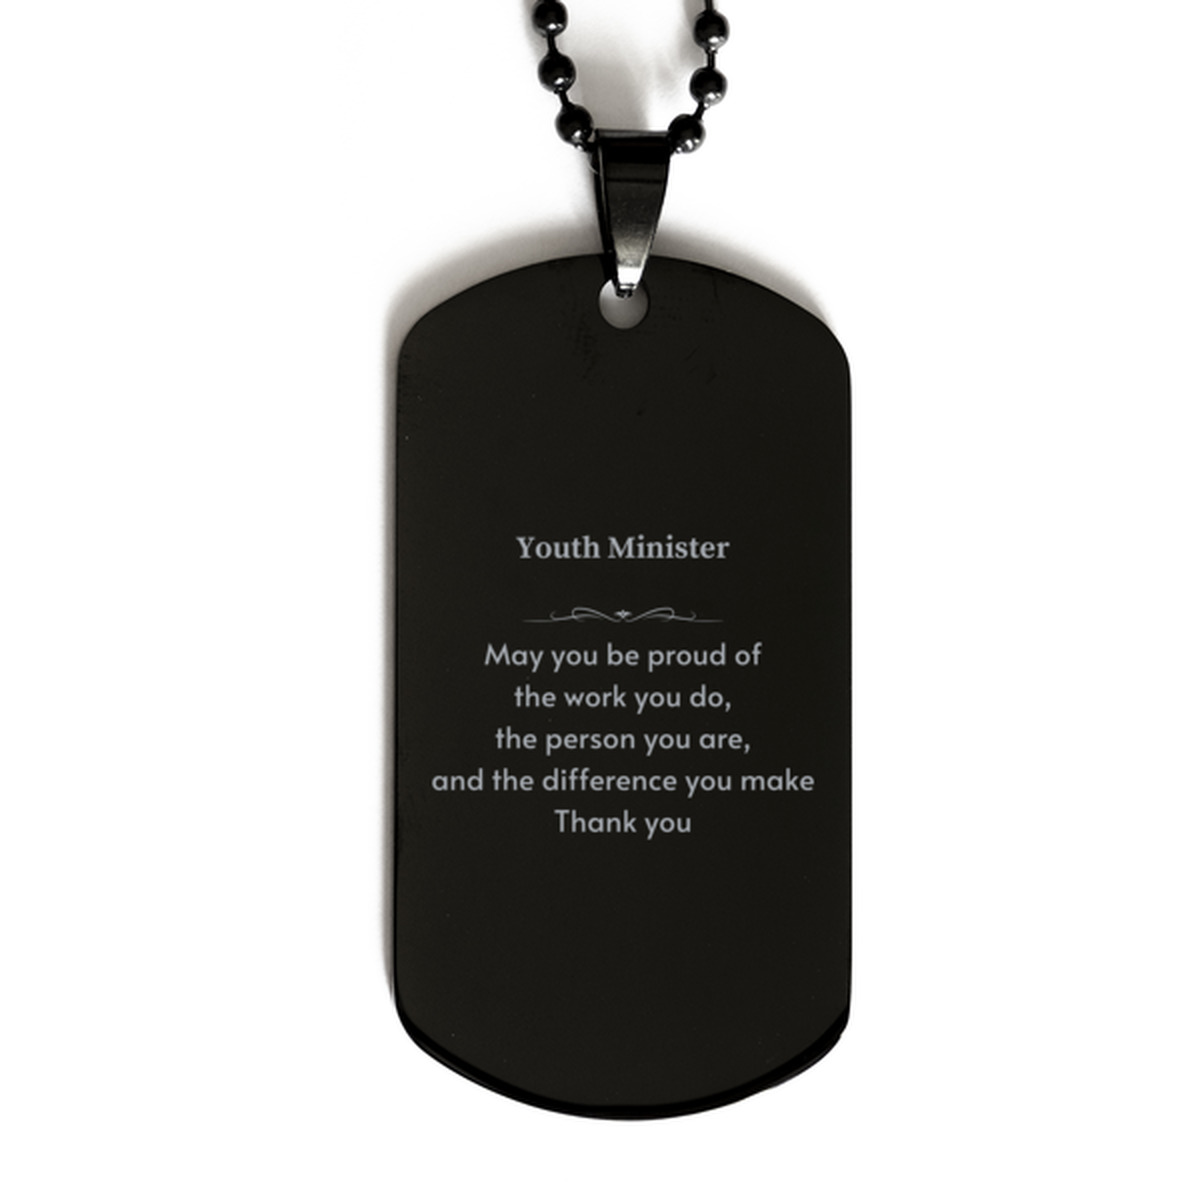 Heartwarming Black Dog Tag Retirement Coworkers Gifts for Youth Minister, Youth Minister May You be proud of the work you do, the person you are Gifts for Boss Men Women Friends